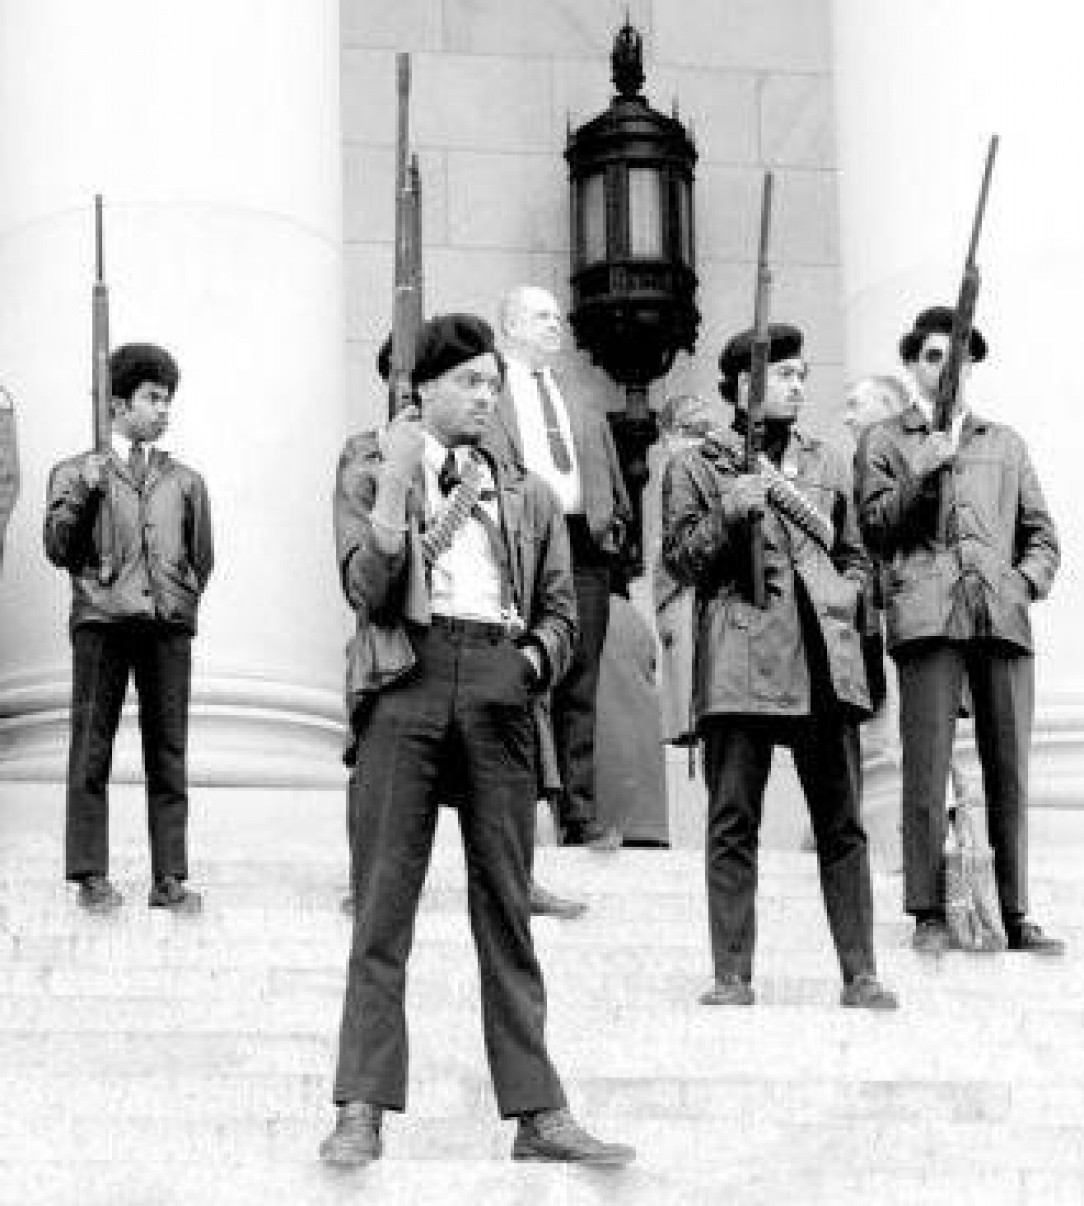 The Black Panther Party on the steps of the Washington State Capitol in Olympia, protesting gun control, 1969